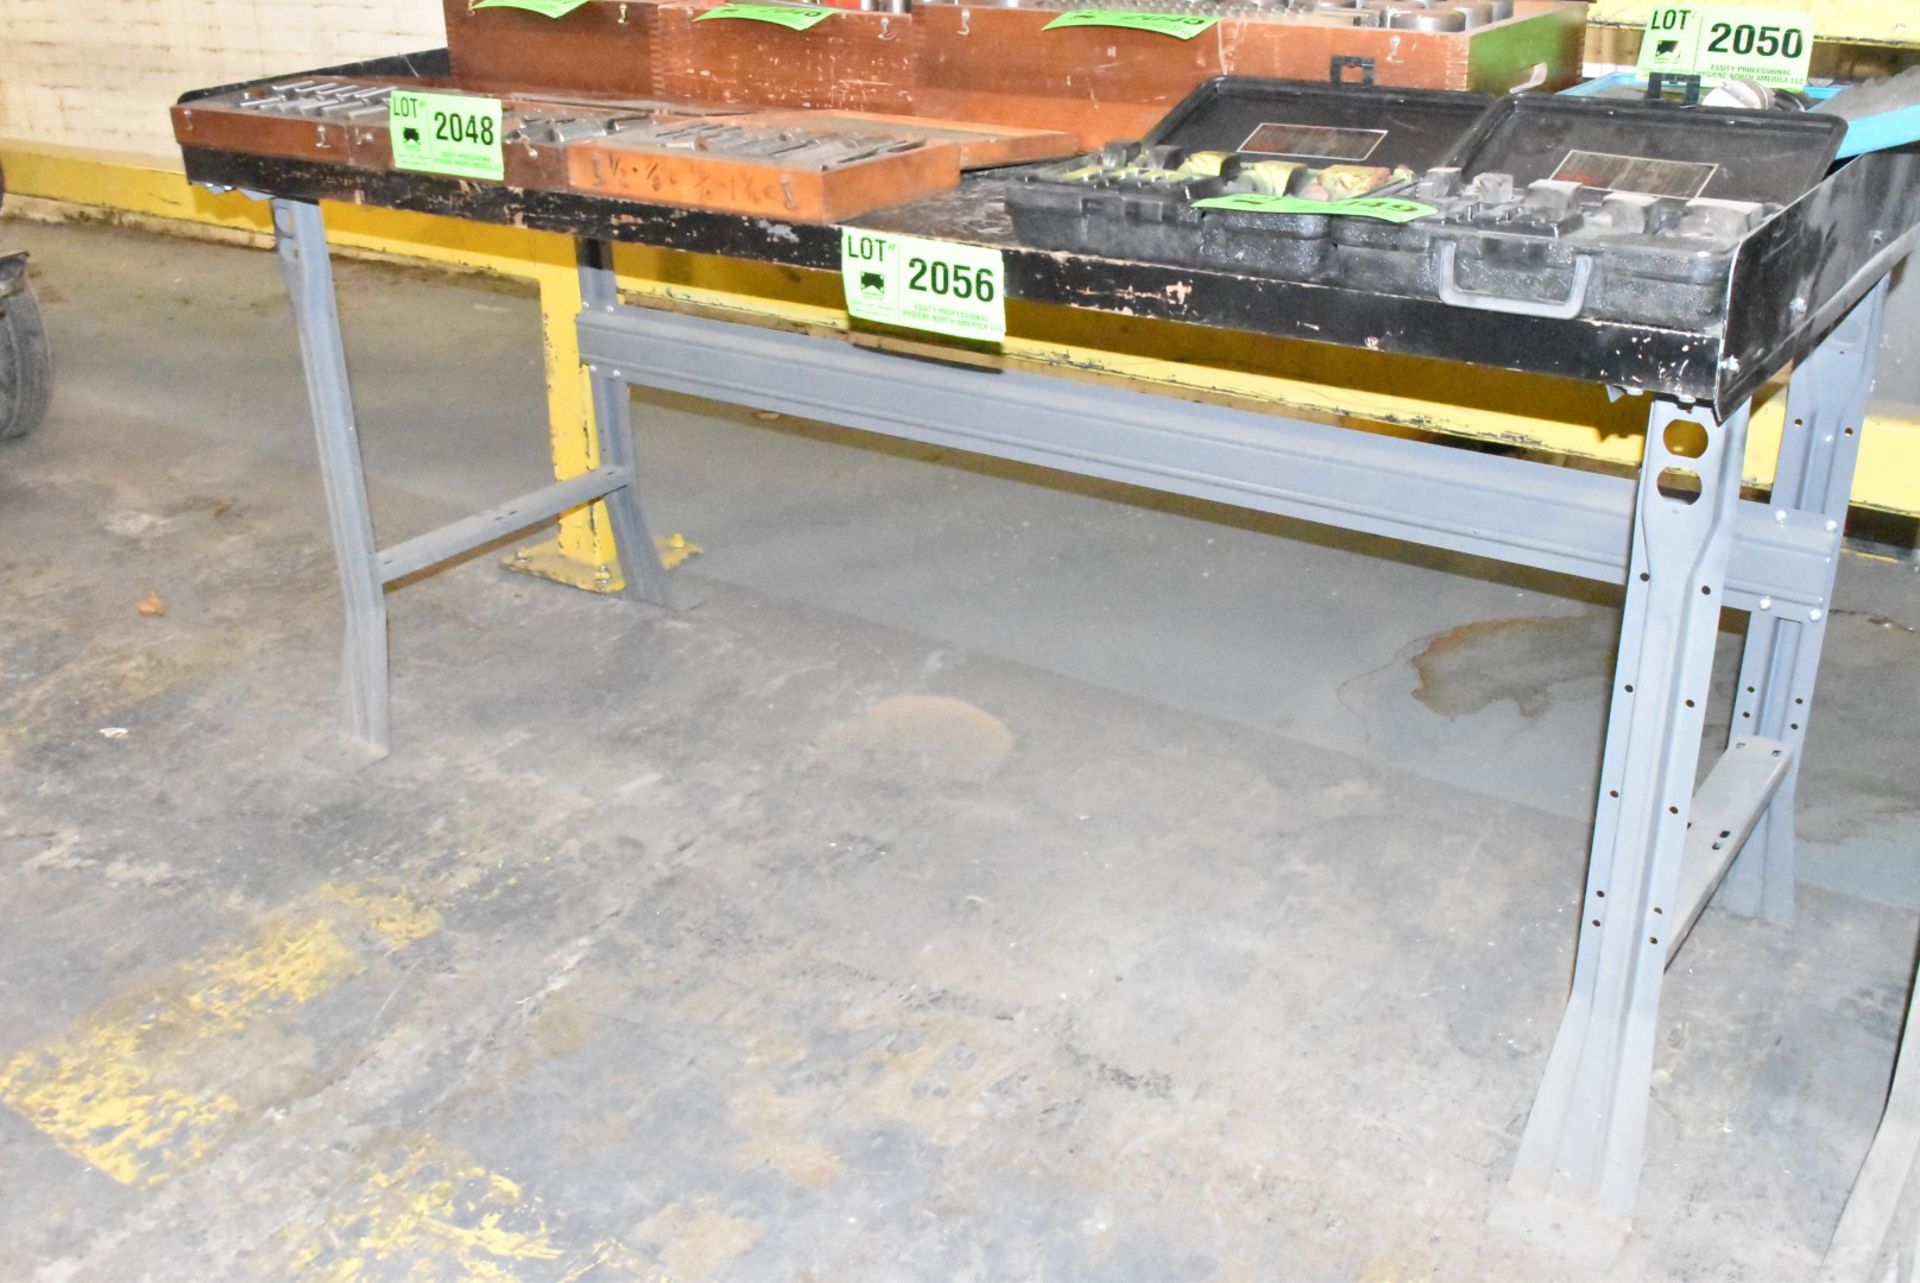 SHOP TABLE [RIGGING FEES FOR LOT #2056 - $50 USD PLUS APPLICABLE TAXES]